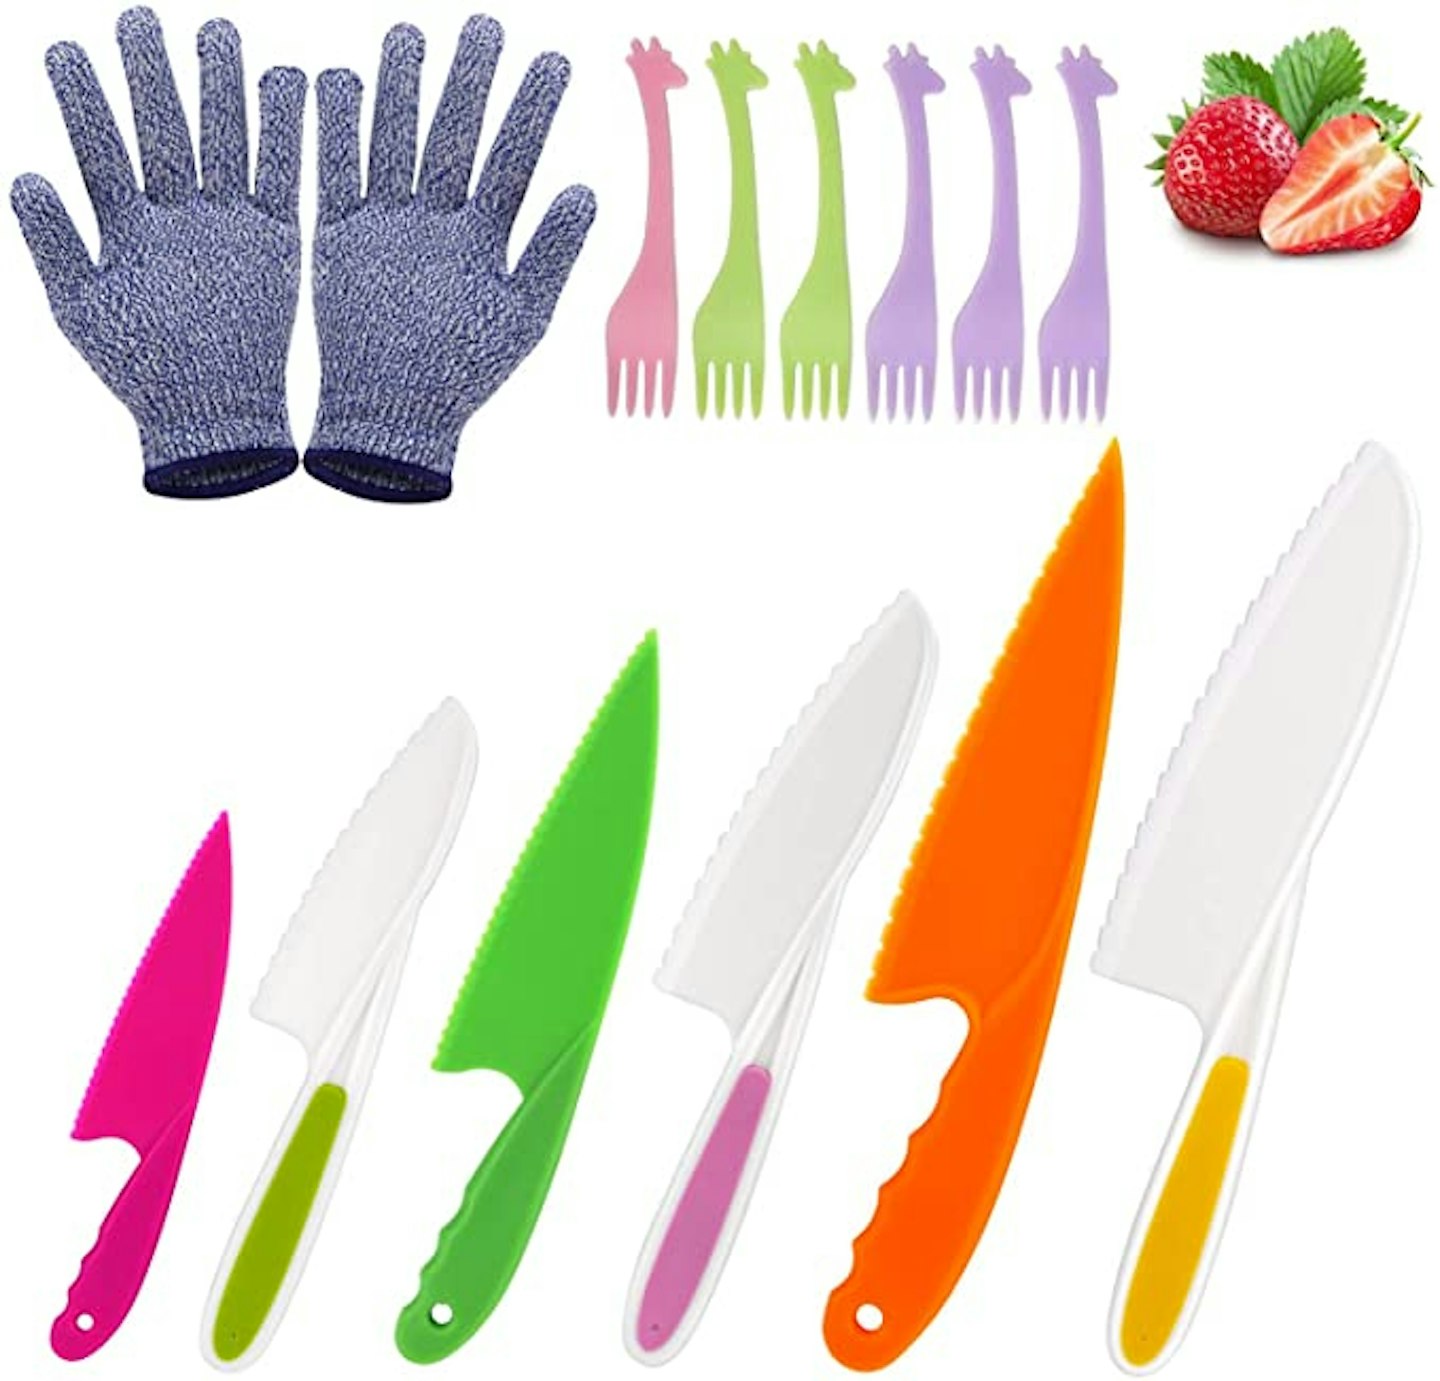 The Best Chef's Knives for Kids